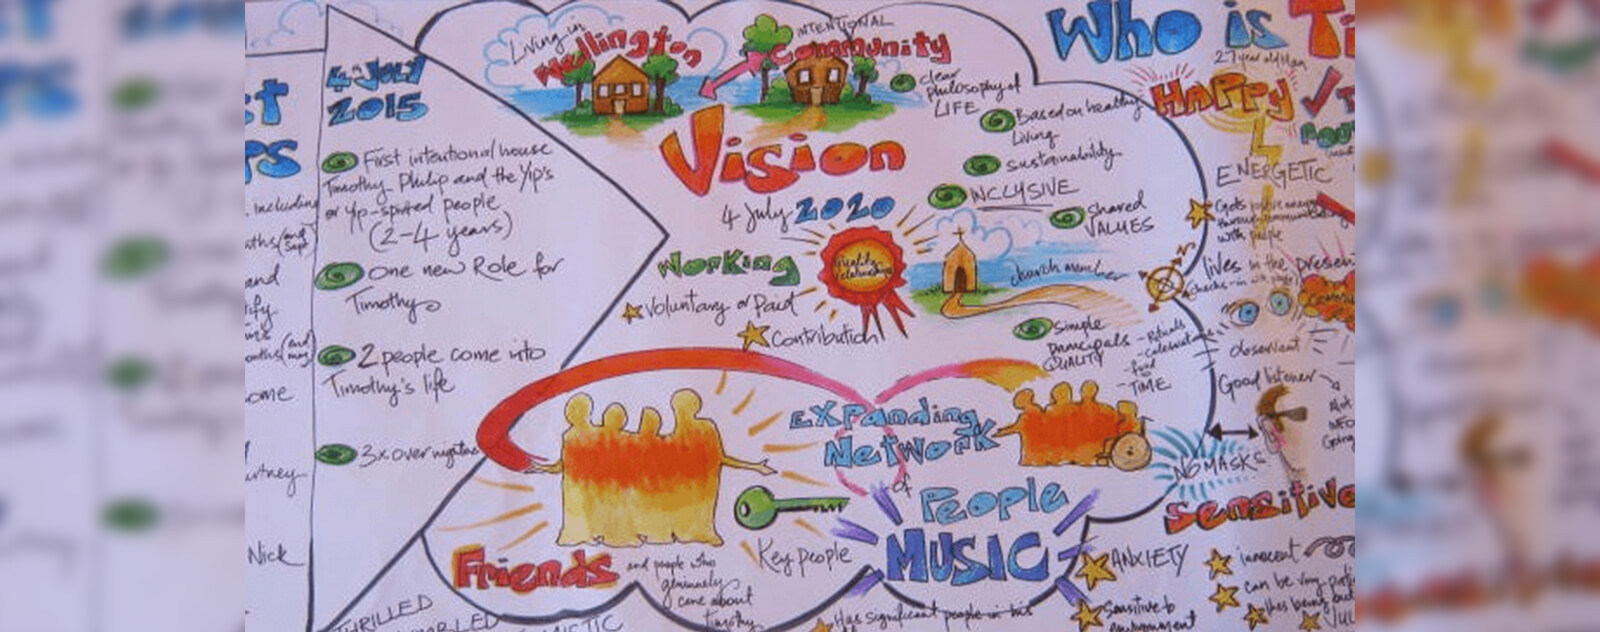 Close up of Luke's Path Plan showing his vision for the future, including the words "Vision," "People," "Music," "Friends," "Happy," "Sensitive."